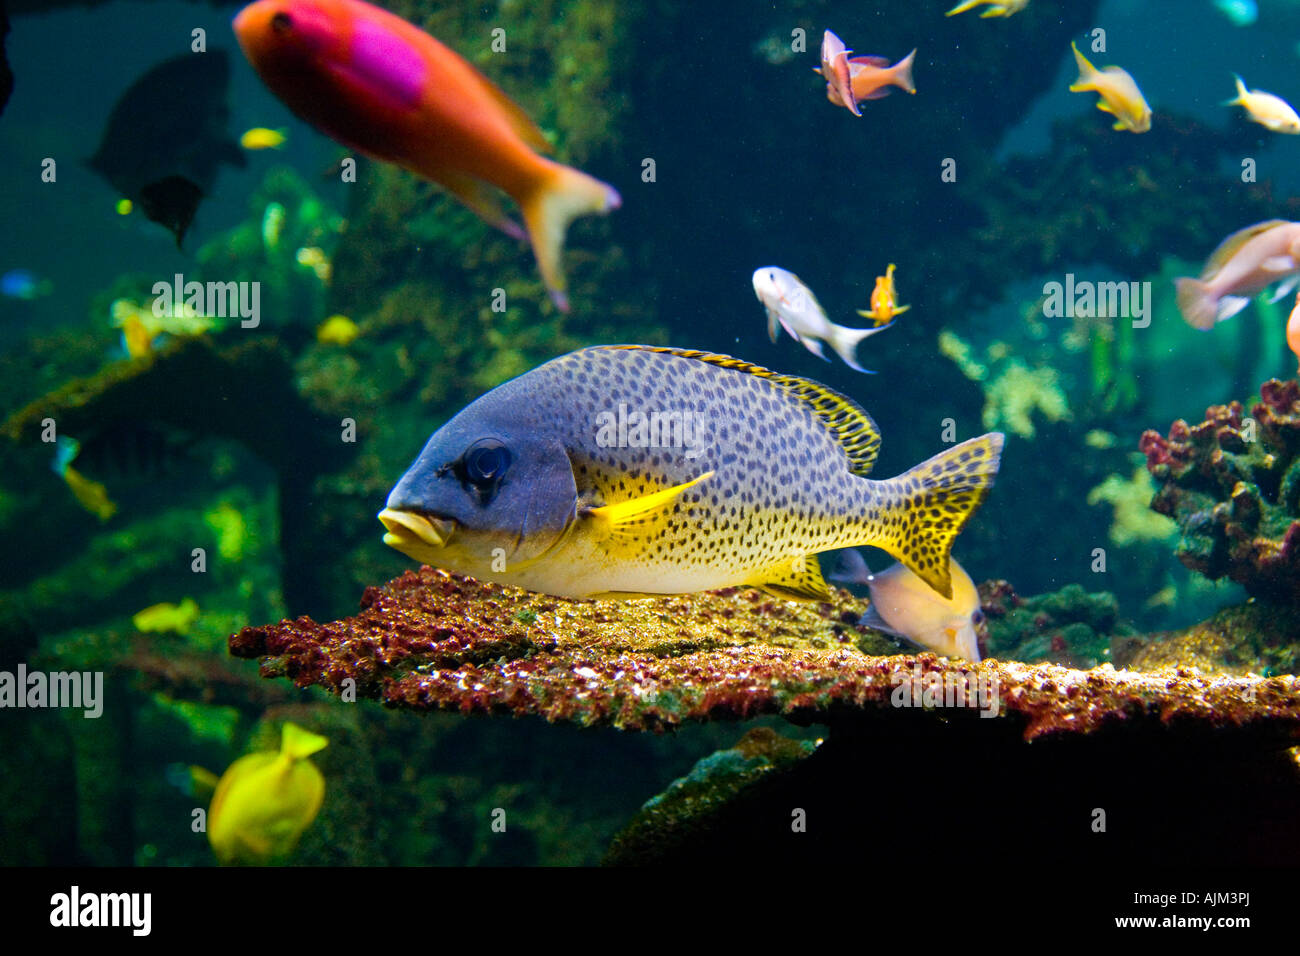 Colourful tropical fish swimming amongst coral in an aquarium with